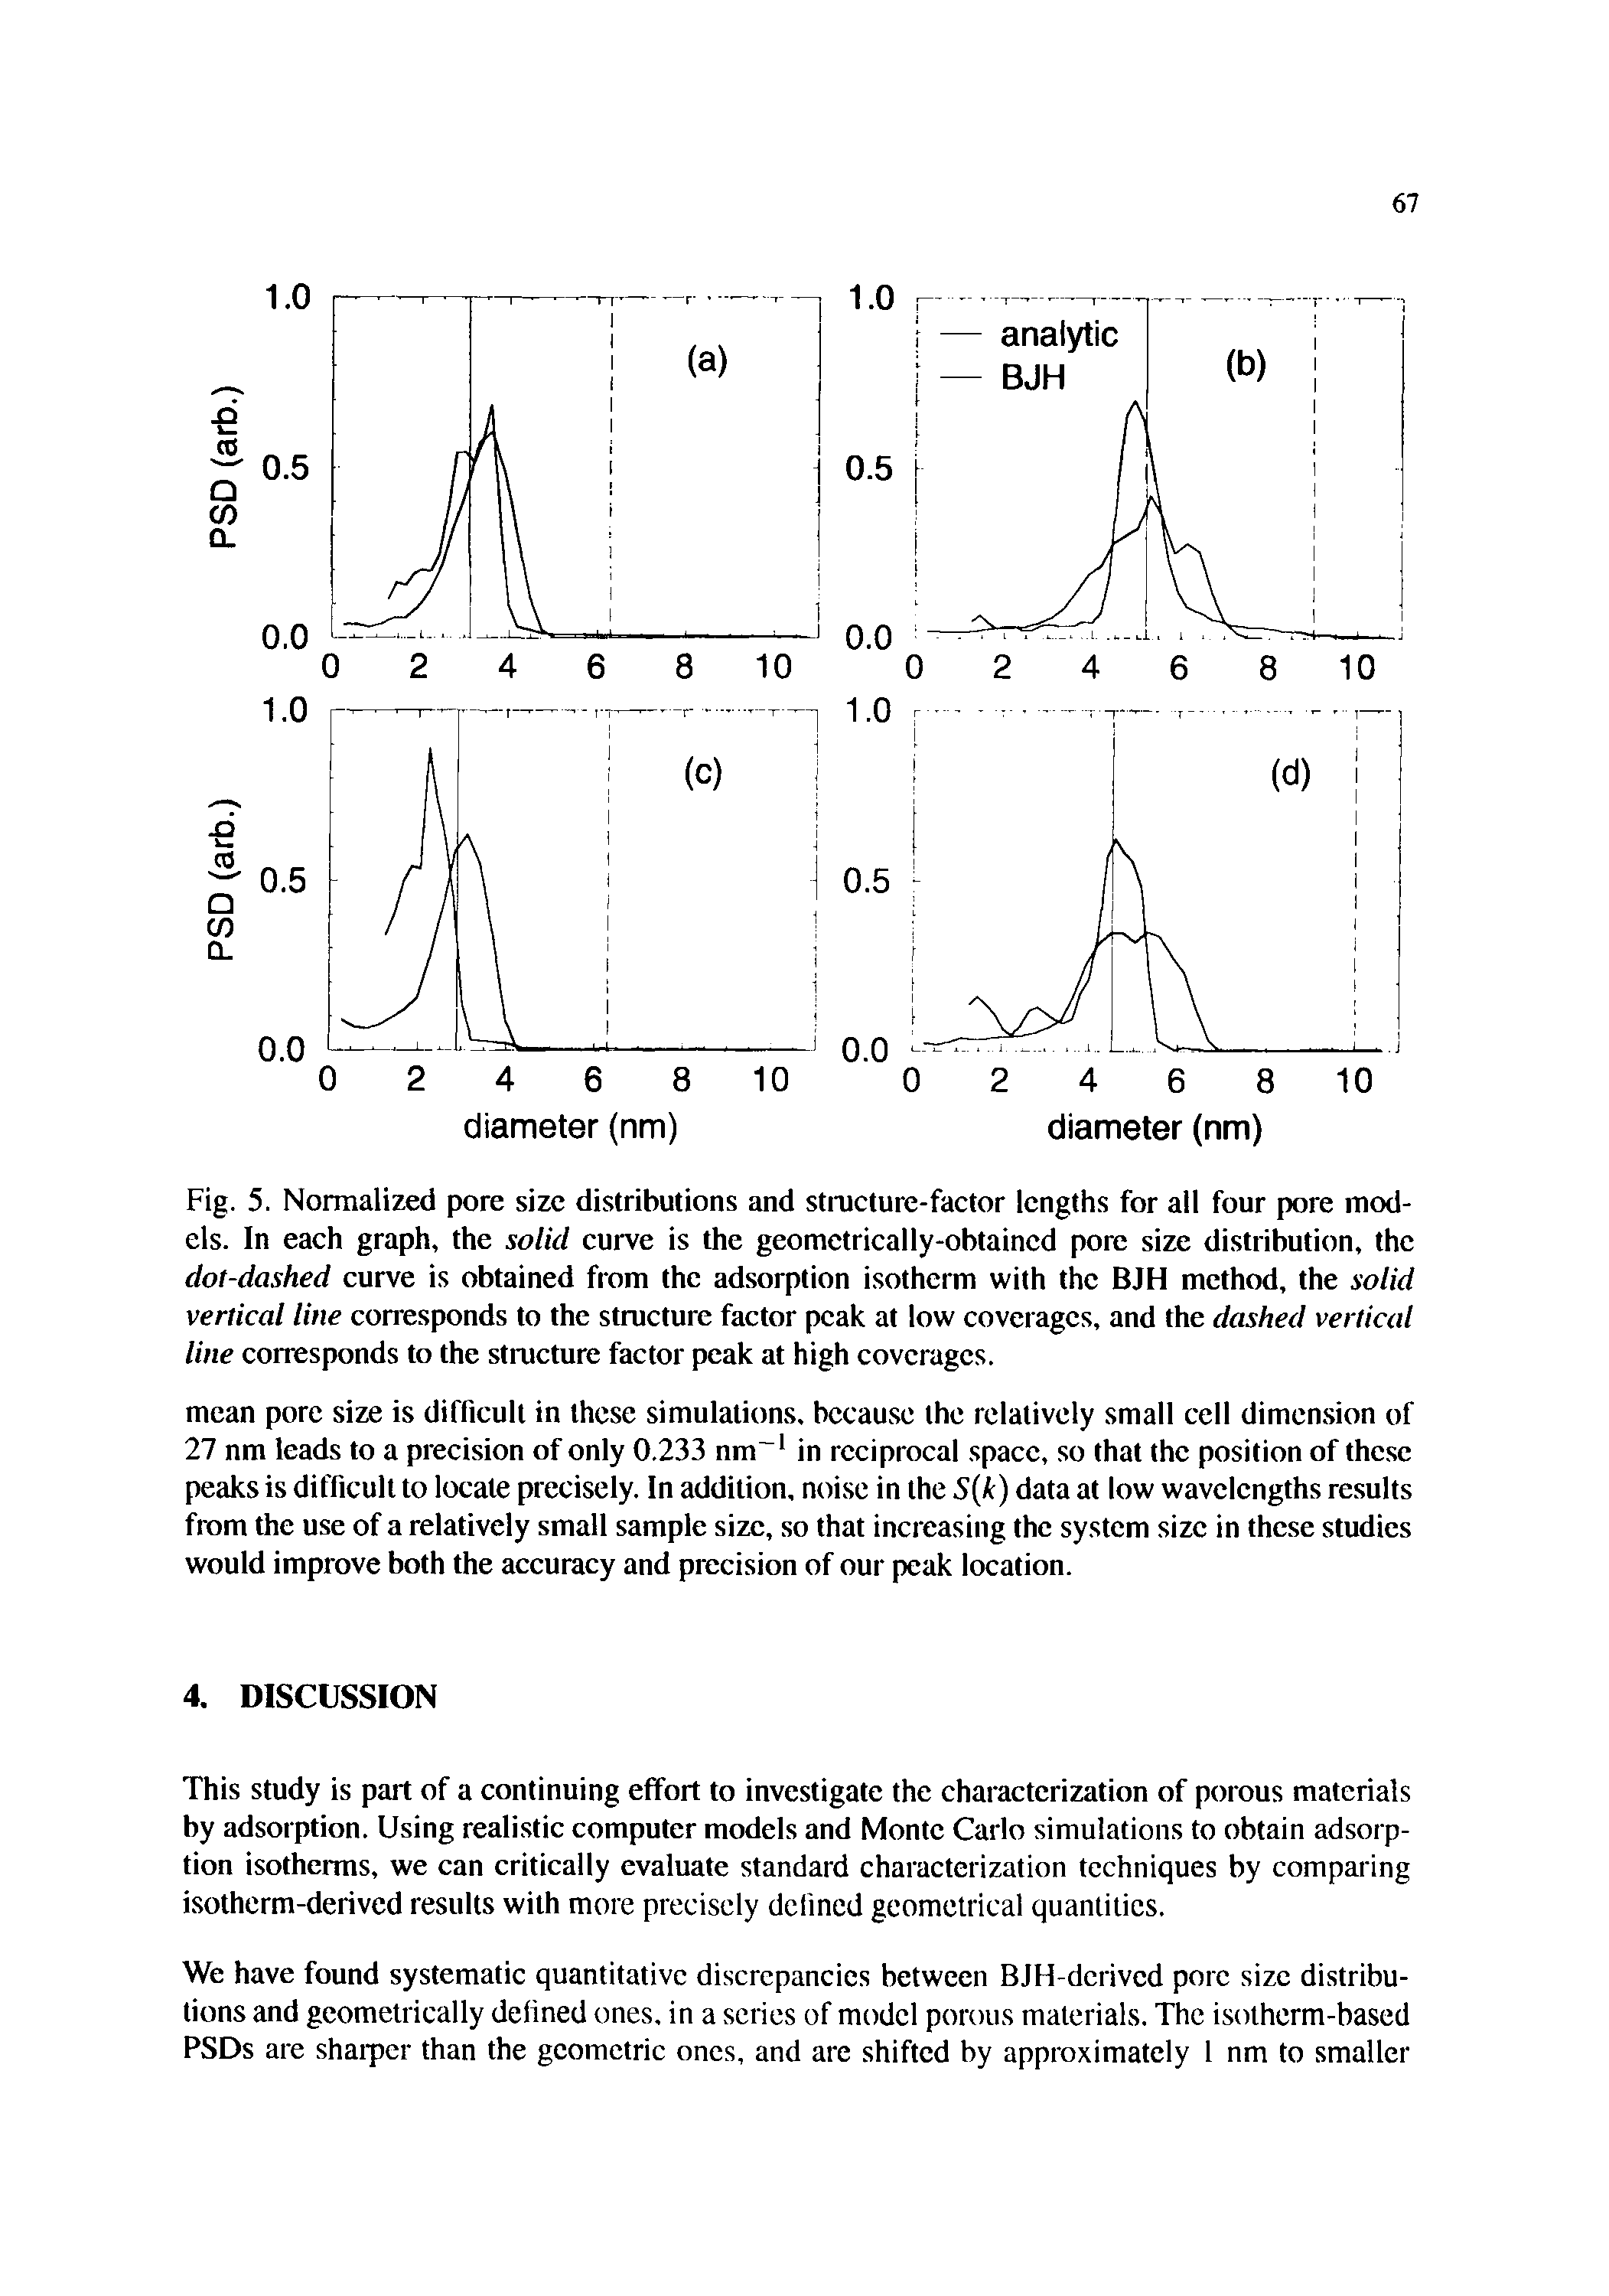 Fig. 5. Normalized pore size distributions and stnicture-factor lengths for all four pore models. In each graph, the solid curve is the geometrically-obtained pore size distribution, the dot-dashed curve is obtained from the adsorption isotherm with the BJH method, the solid vertical line conesponds to the structure factor peak at low coverages, and the dashed vertical line corresponds to the structure factor peak at high coverages.